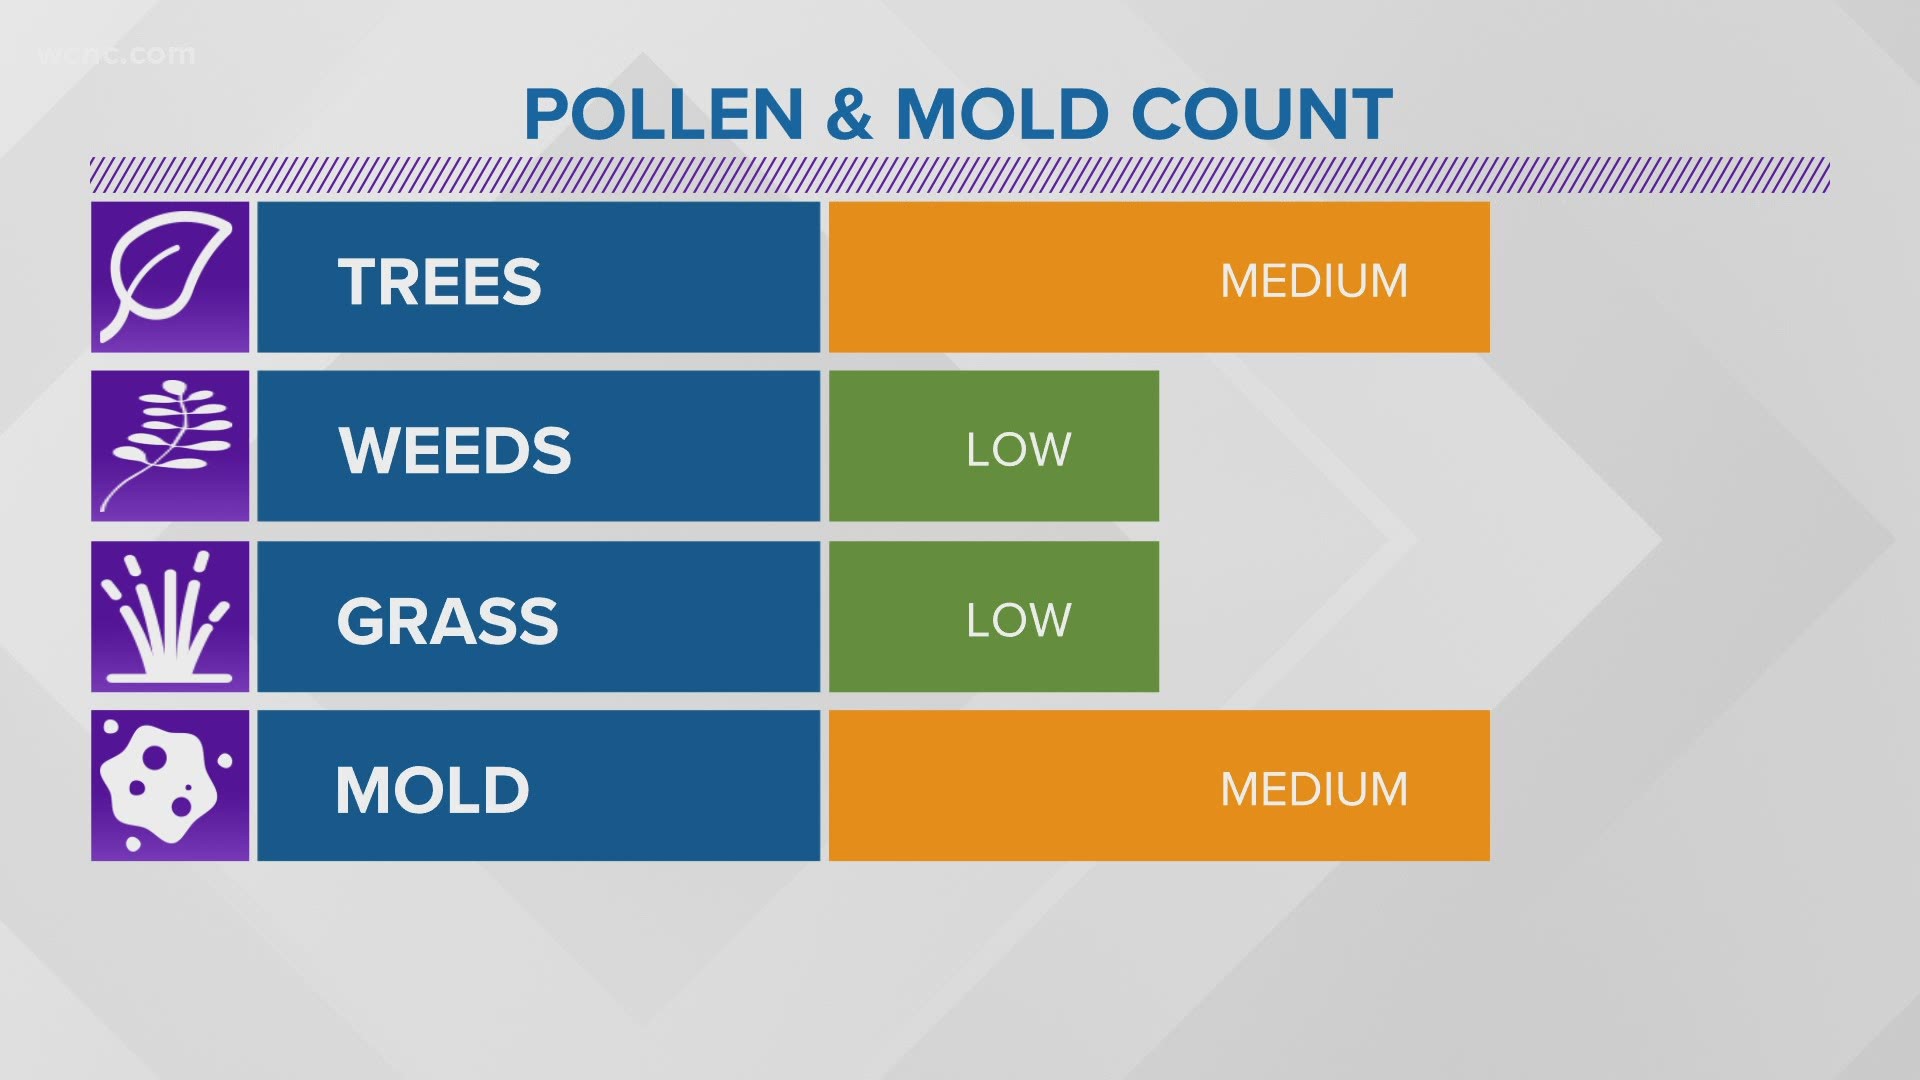 Allergies bugging you? Pollen levels are on the rise